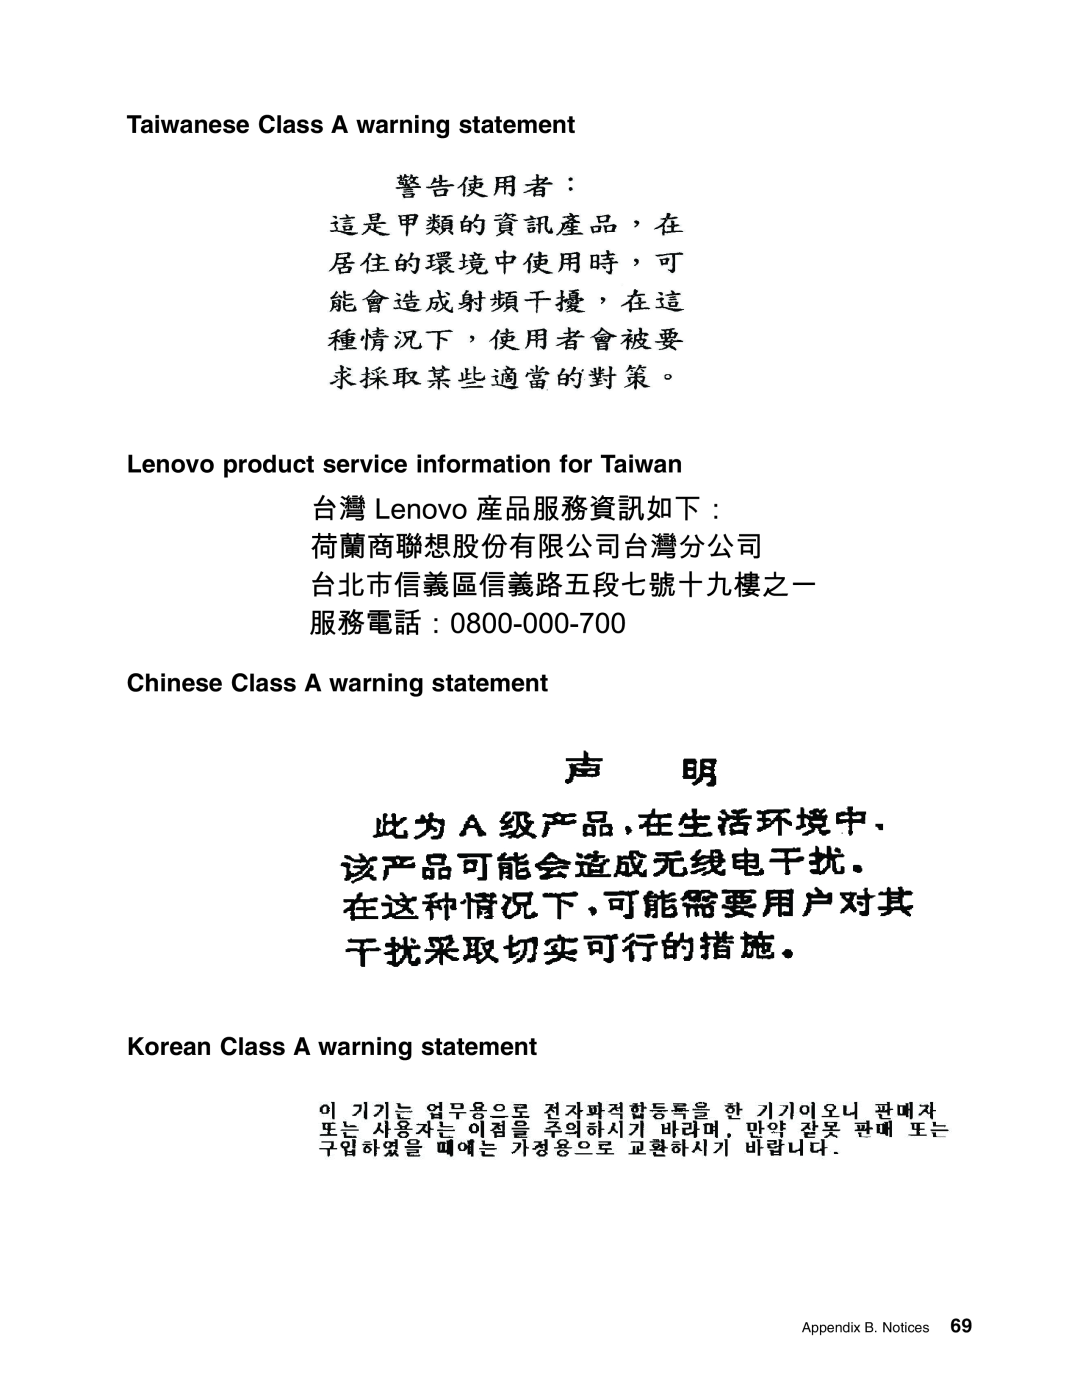 Lenovo 6435, 6438 Taiwanese Class A warning statement, Lenovo product service information for Taiwan, Appendix B. Notices 